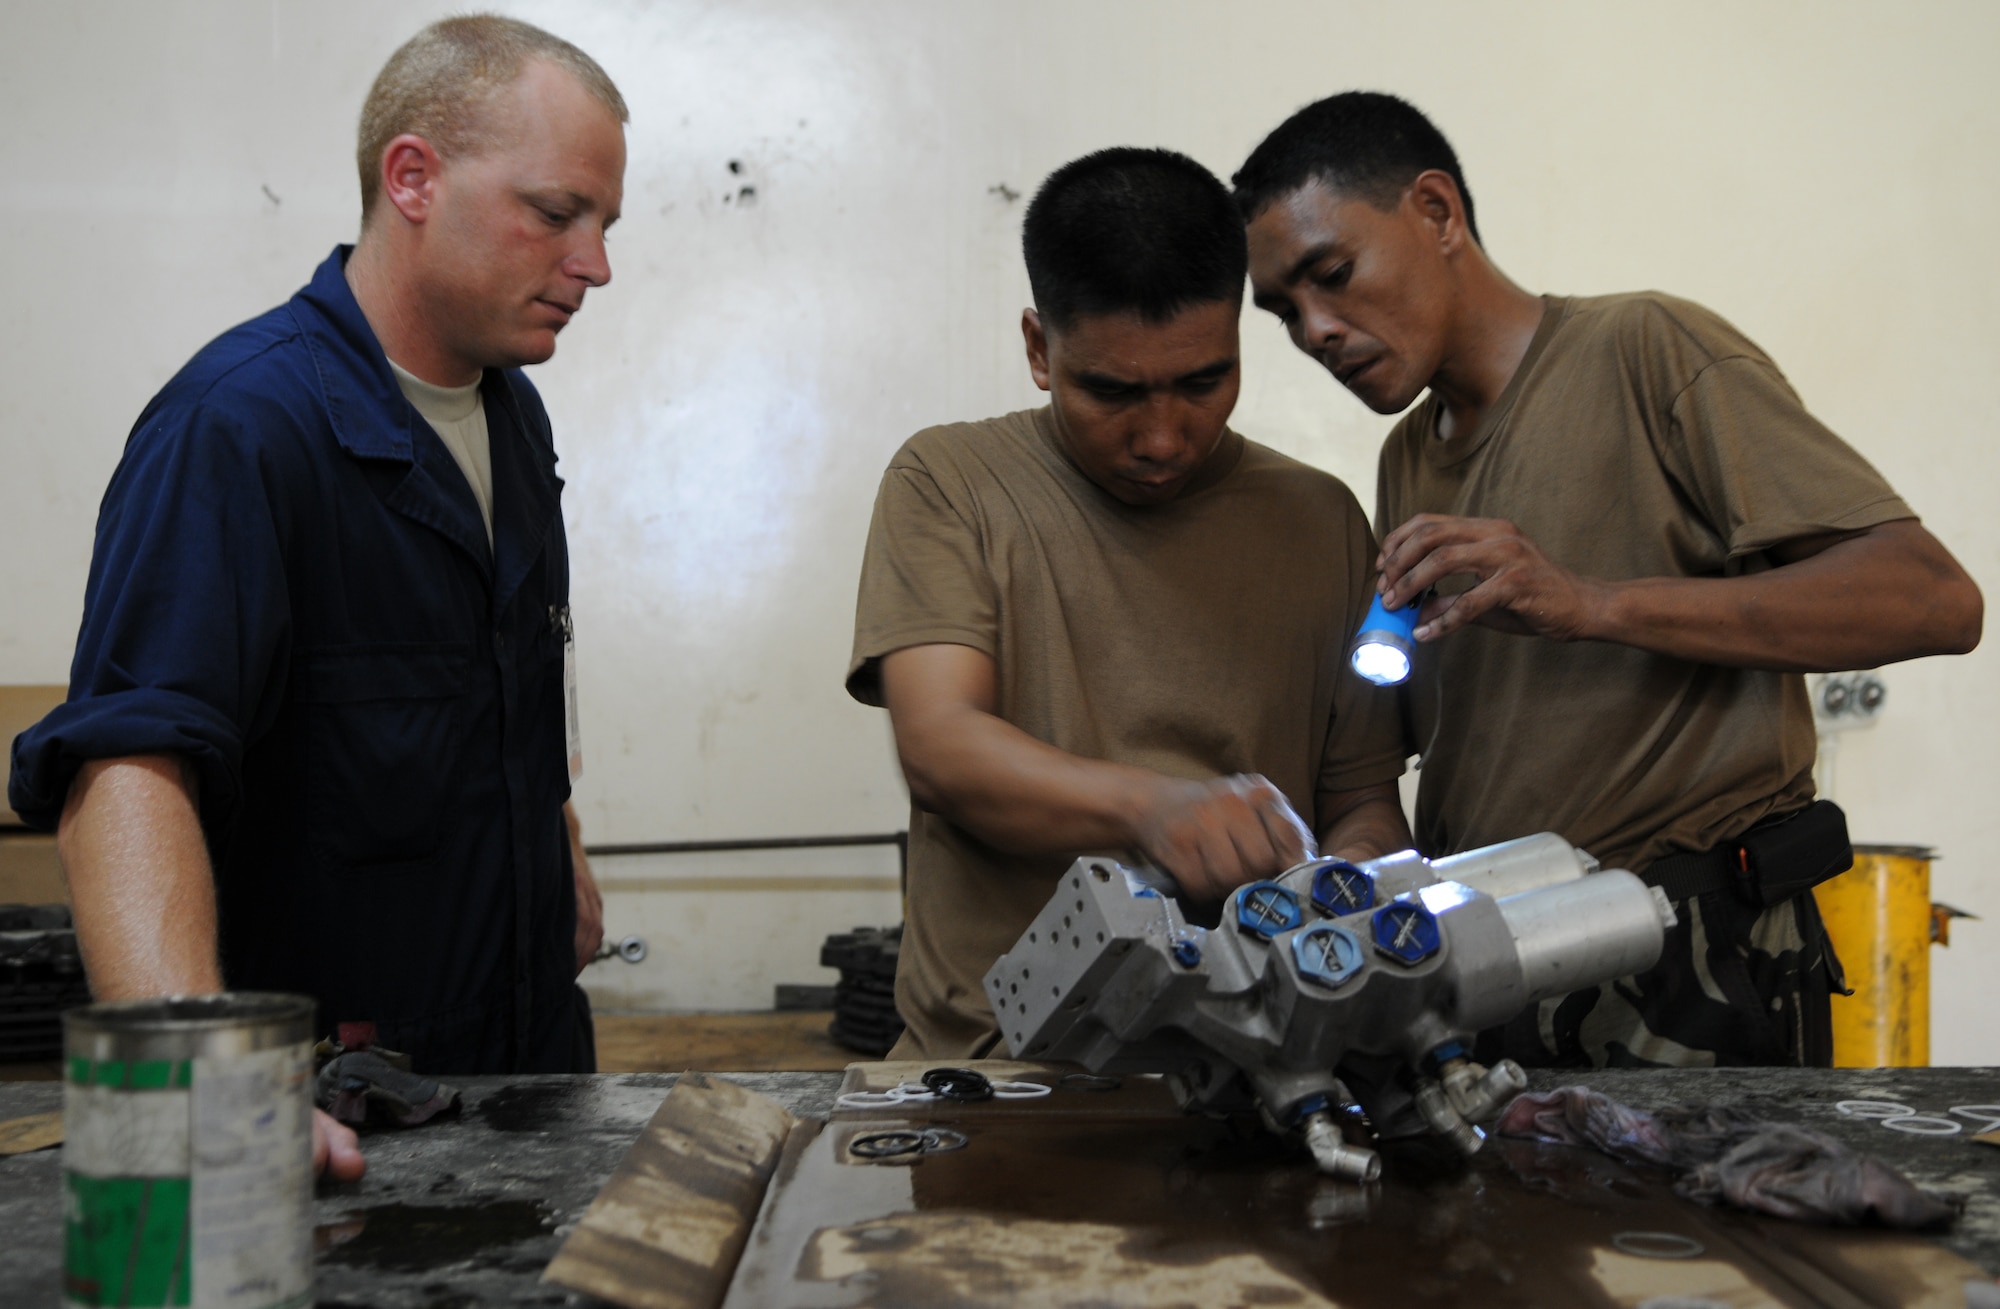 MACTAN AIR BASE, Philippines -- Tech. Sgt. Dennis Henderson, a 353rd Maintenance Squadron member, watches members of the Philippine Air Force remove seals from a hydraulic boost pack here June 22.  Five maintainers from the 353rd MXS conducted a two-week training exchange with multiple PAF C-130 maintenance units during Teak Piston 09-2, a training exchange designed to enhance U.S and Philippine military training, capabilities and increase interoperability. (U.S. Air Force Photo by Tech. Sgt. Aaron Cram)